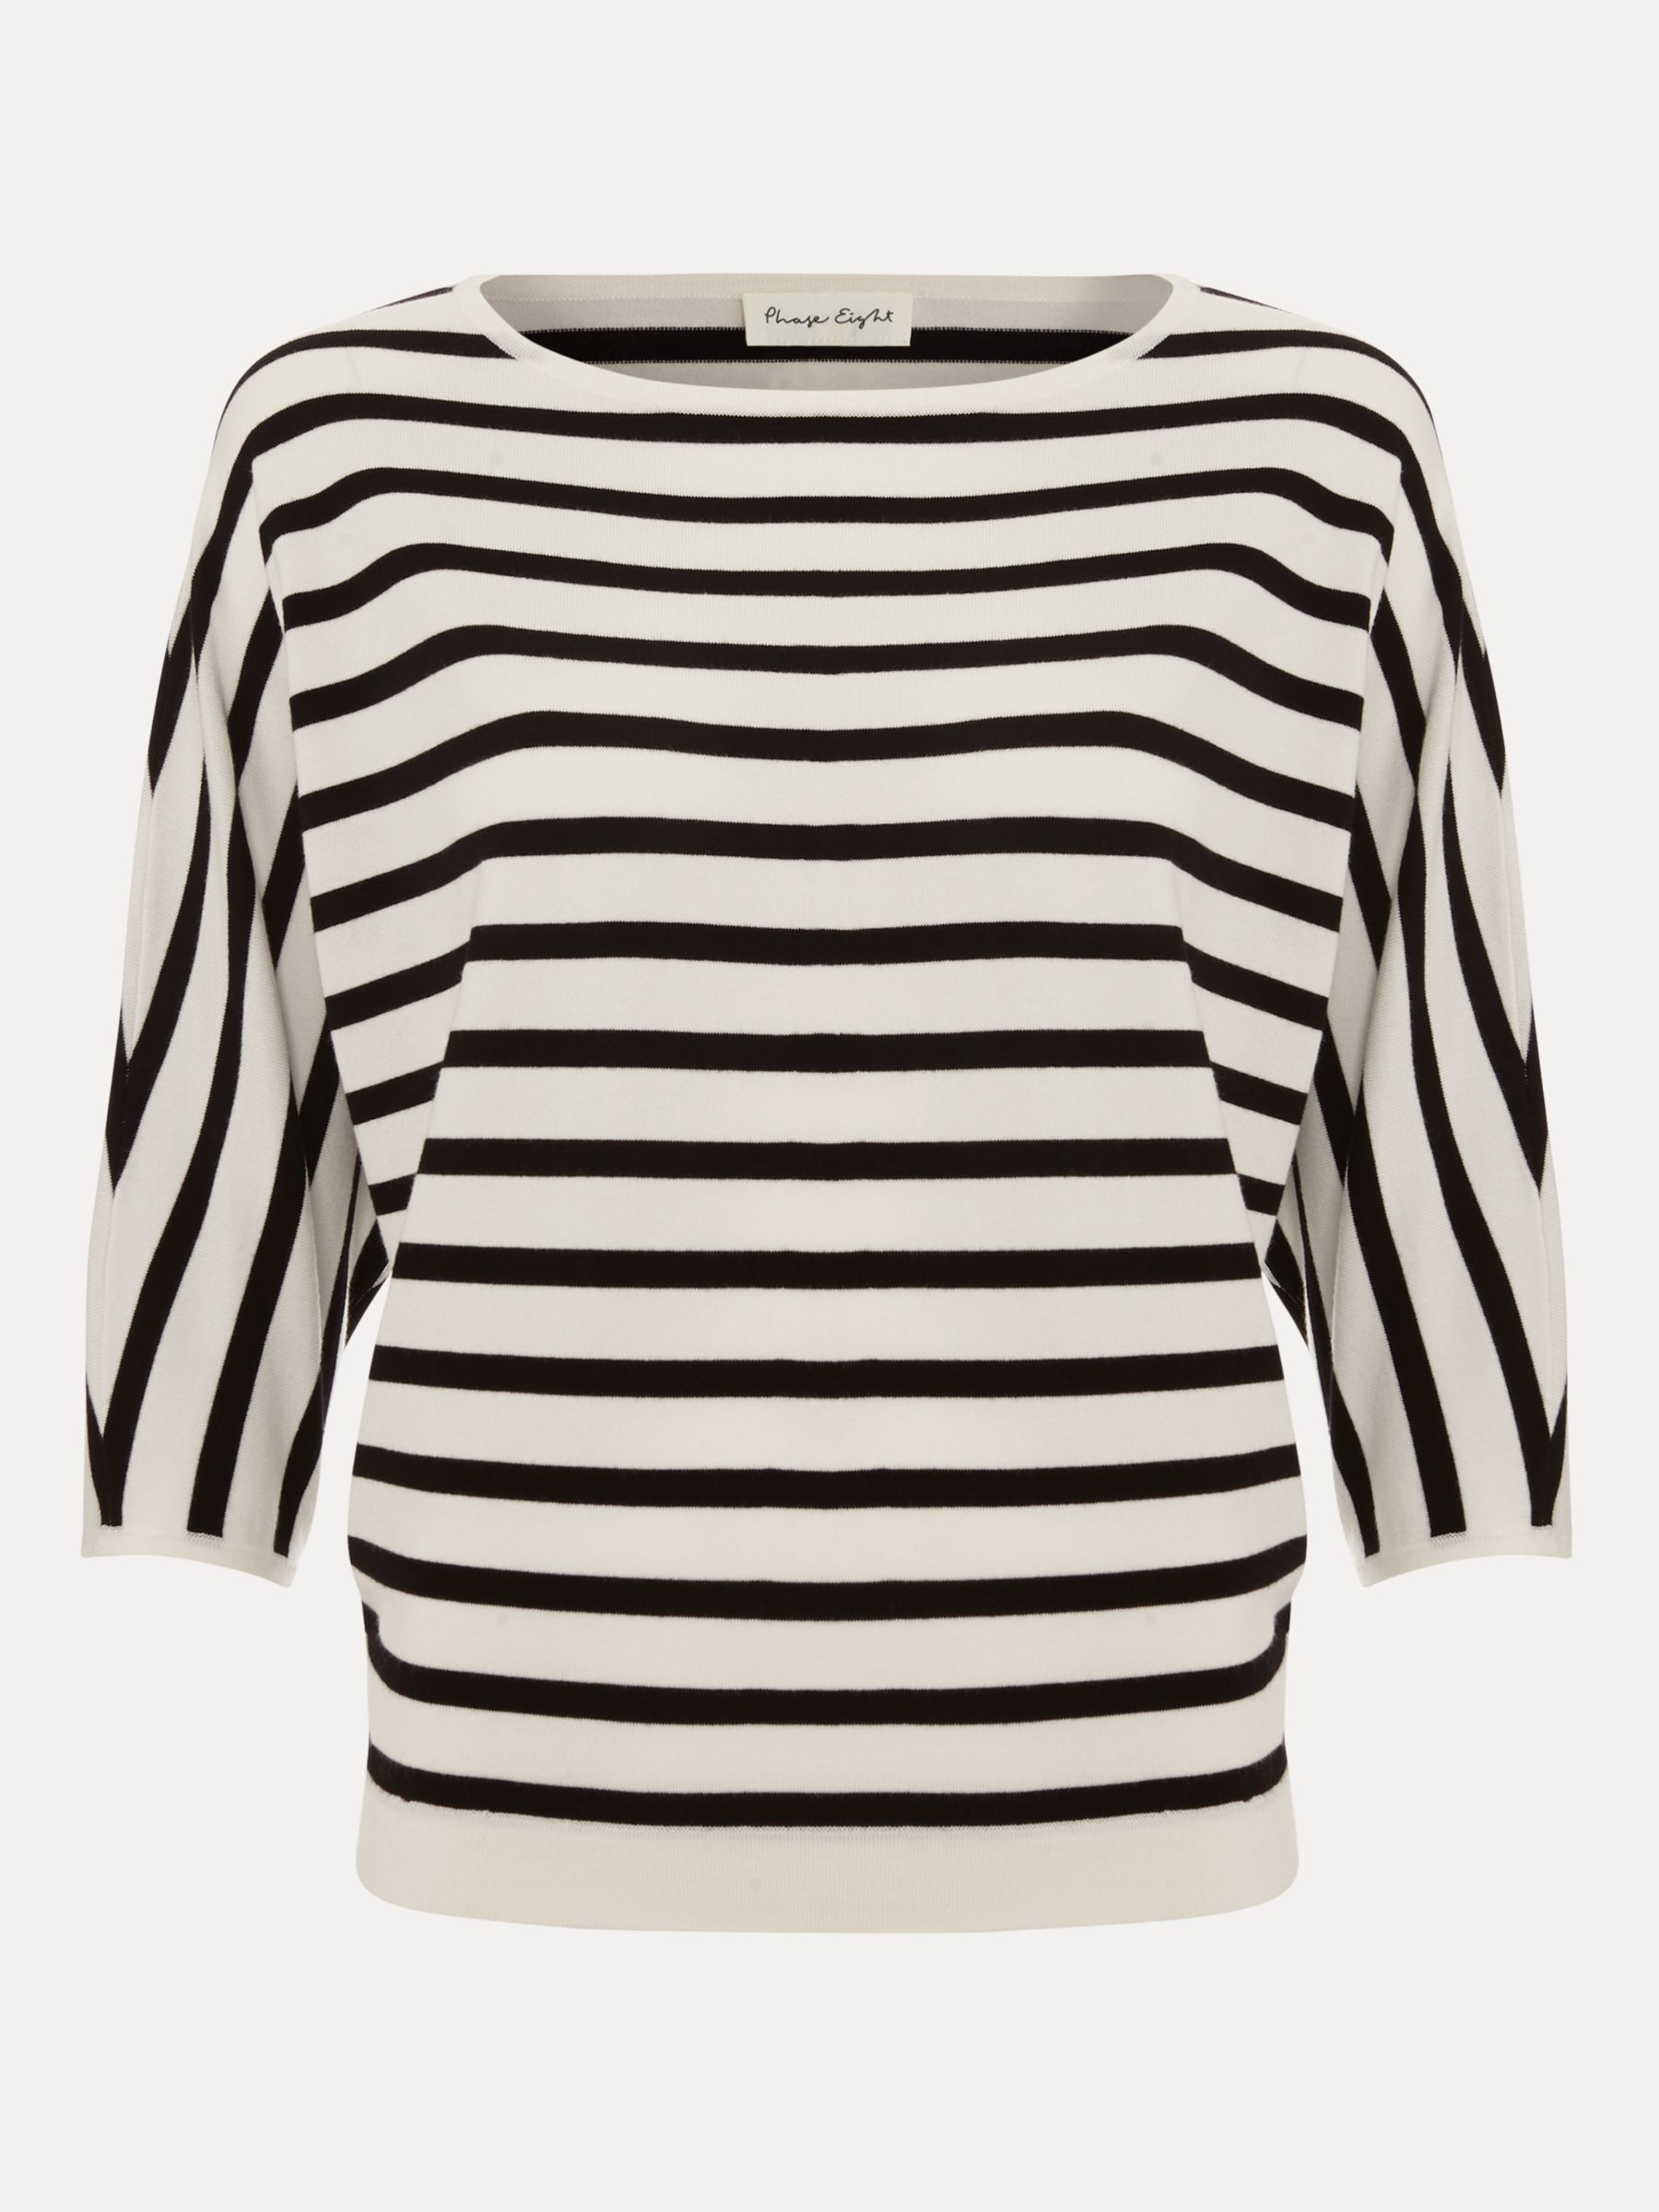 Buy Phase Eight Cristine Ecovero Knit Jumper Online at johnlewis.com